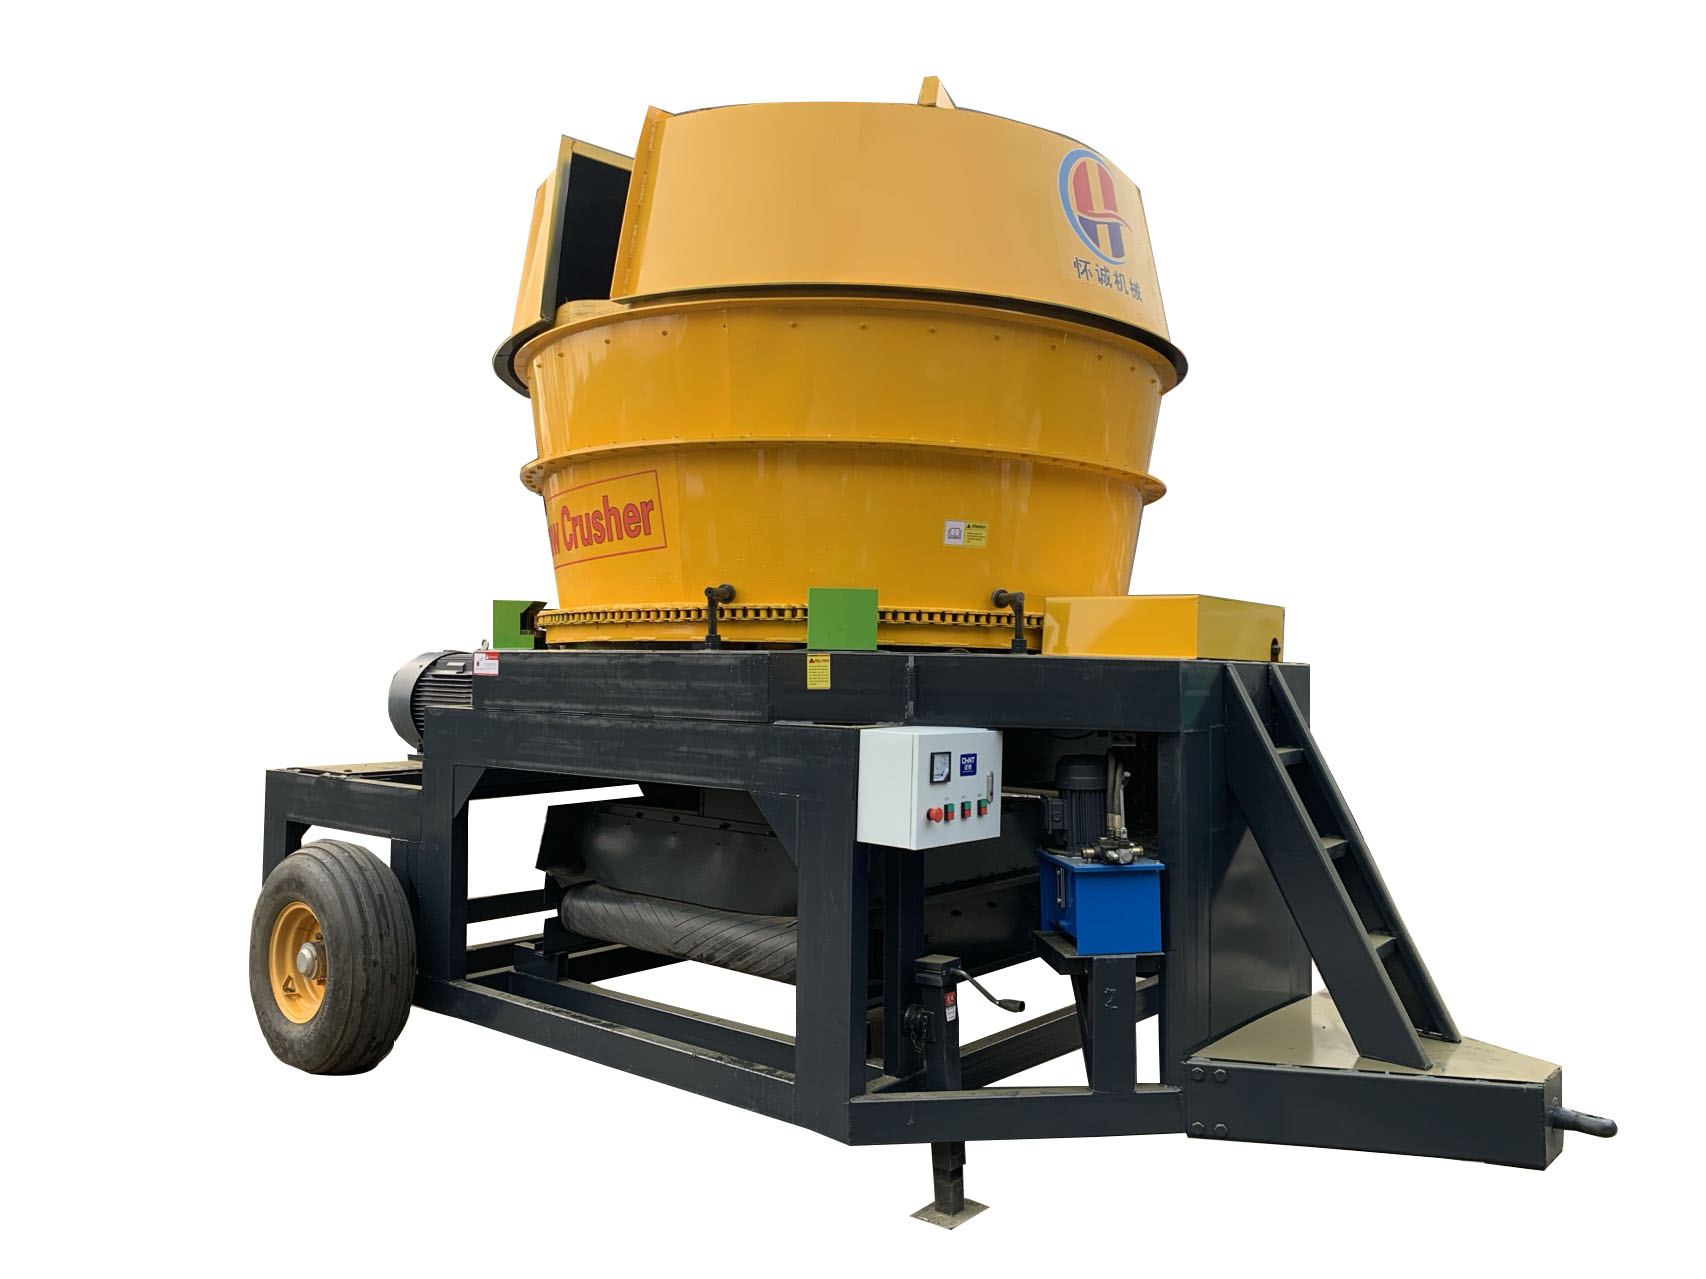 Explore the straw bale crusher: a powerful tool to improve feed processing efficiency